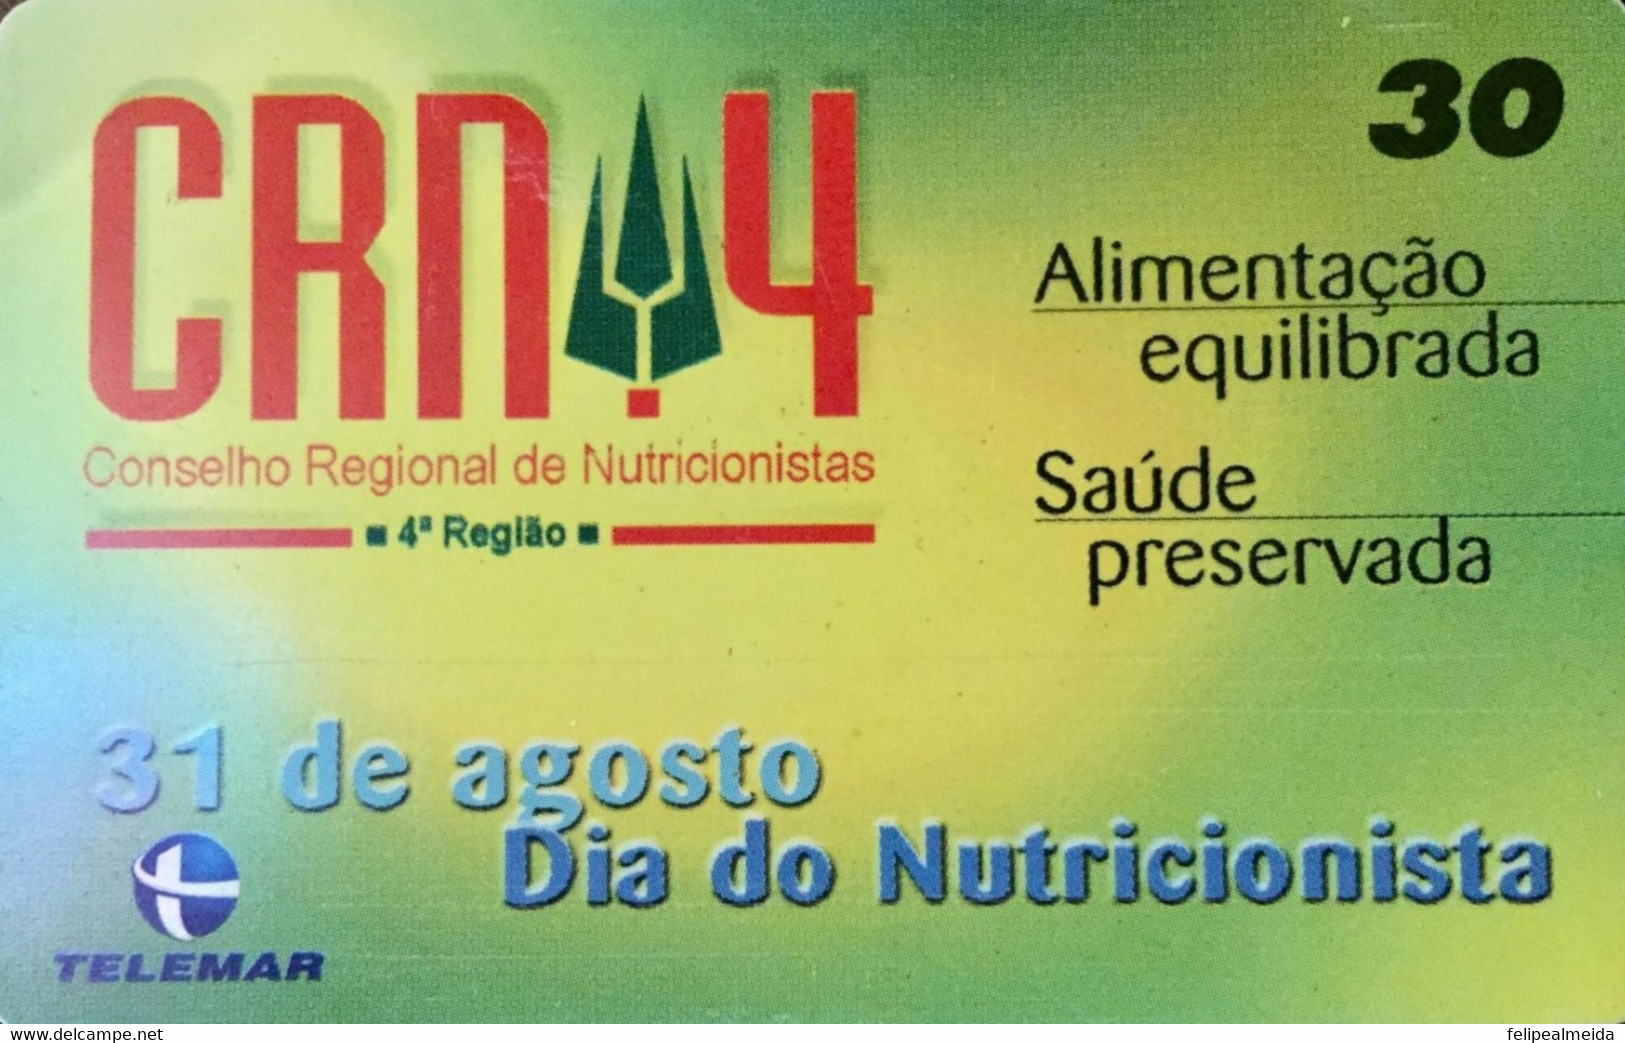 Phone Card Manufactured By Telemar In 1999 - Homage To The Nutritionist Day Celebrated On 31 August - Alimentation